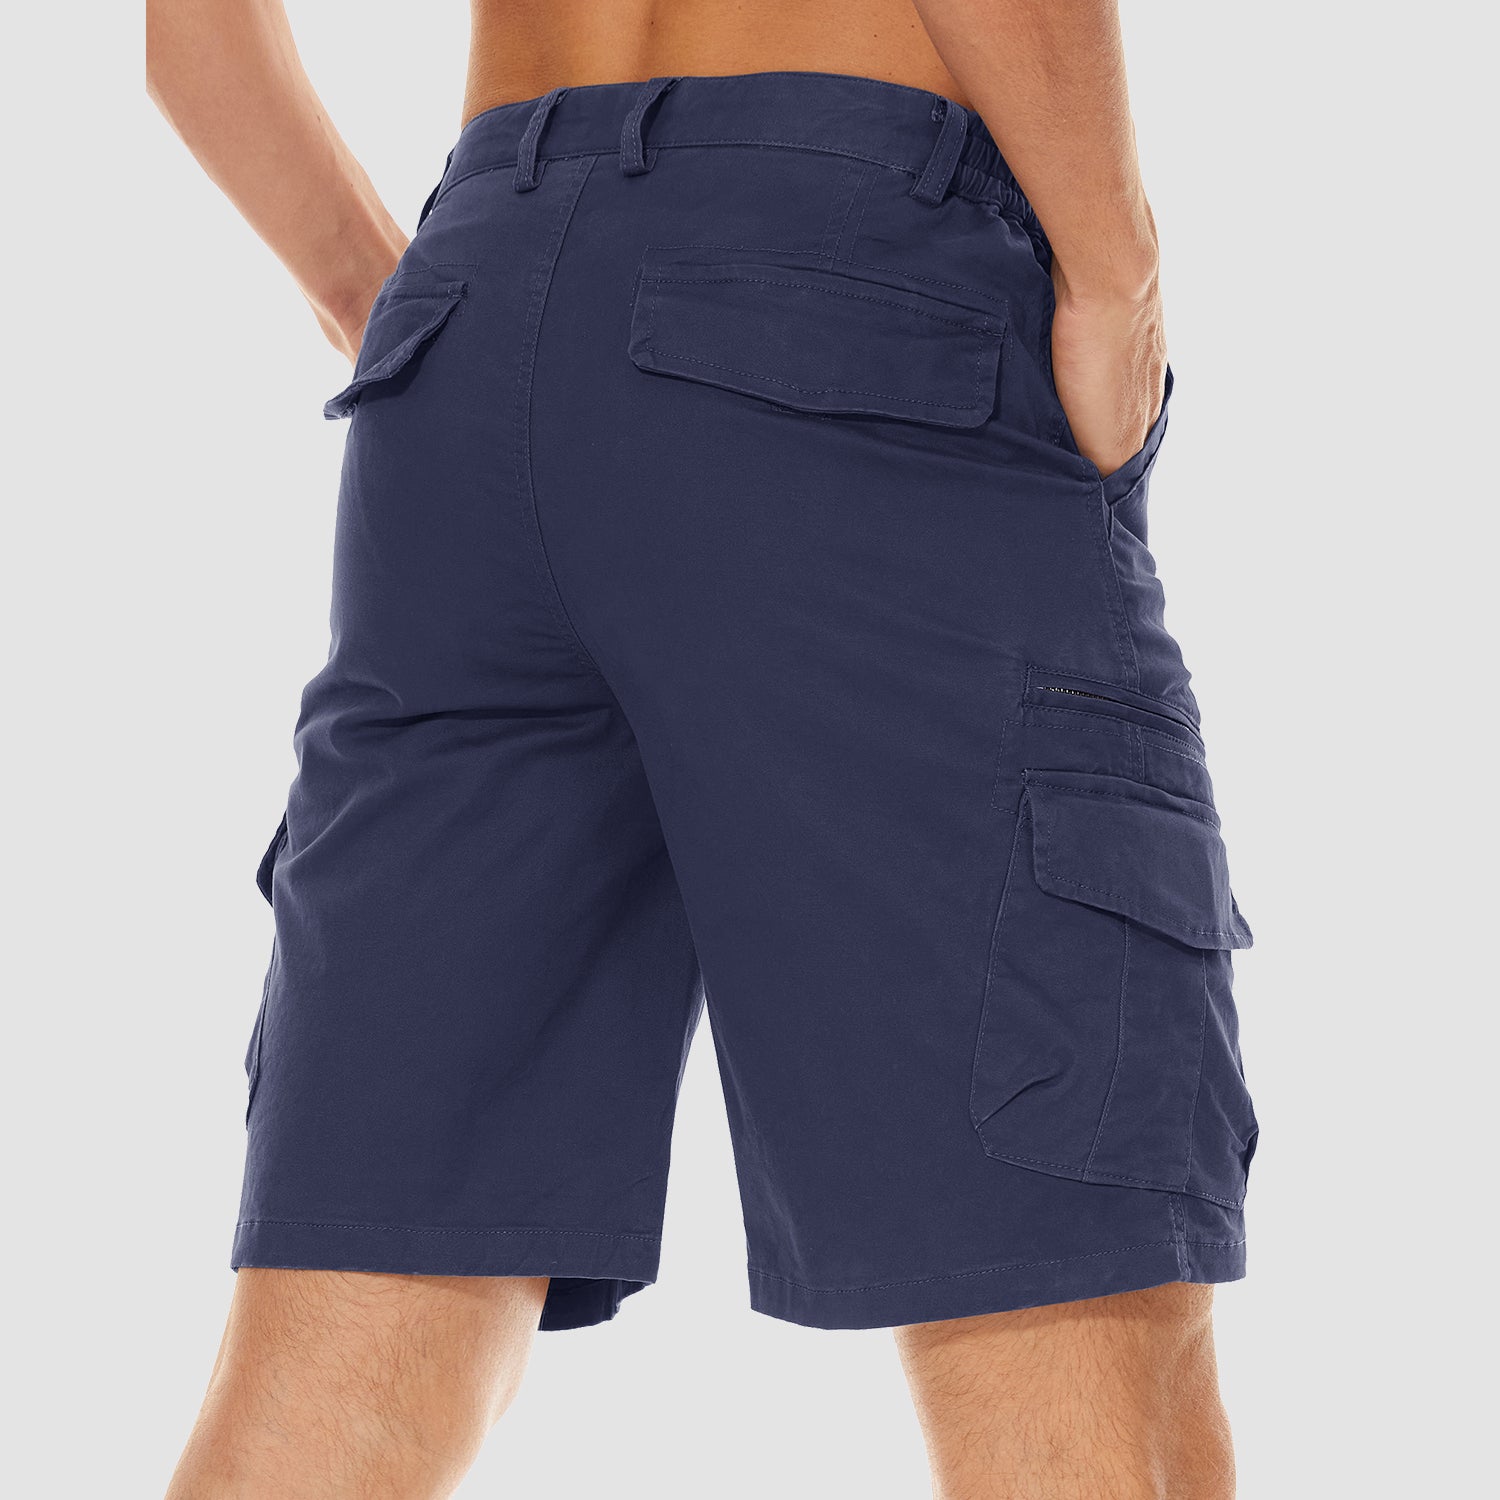 Fesfesfes Fashion Mens Shorts with Pocket Zipper Buttons Solid Color  Leisure Cargo Shorts Tooling Mid-Length Shorts Clearance 